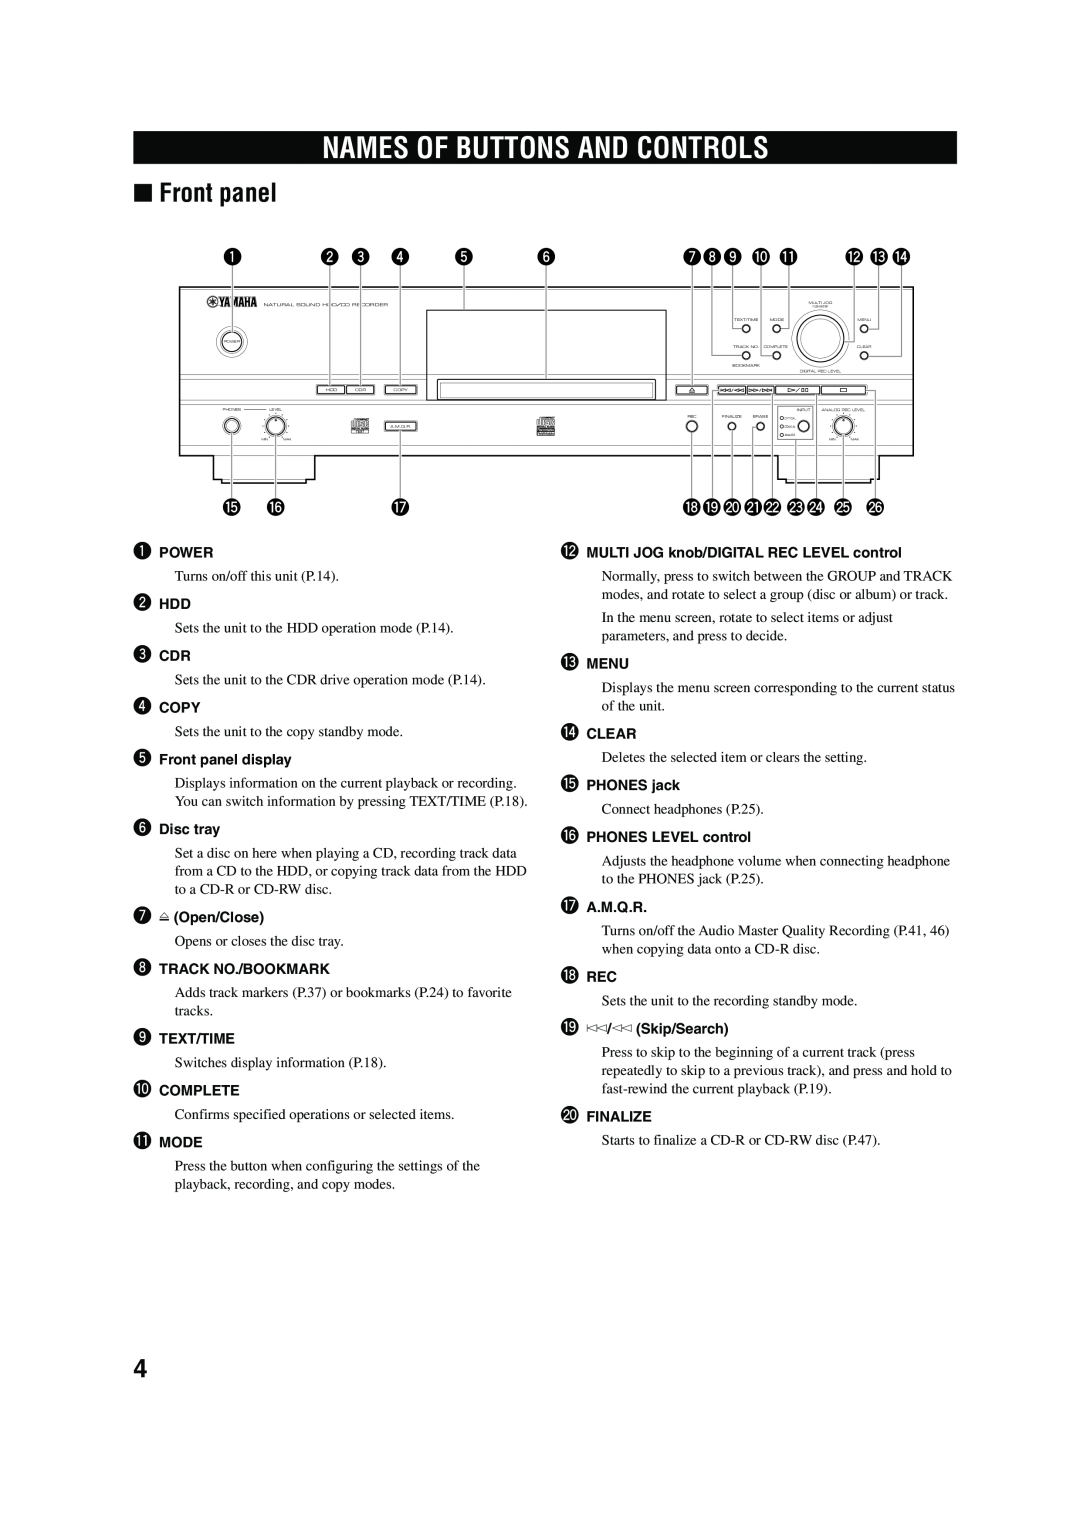 Yamaha CDR-HD 1500 owner manual Names Of Buttons And Controls, Front panel, 789 0 q, w e r, iopas df g h 